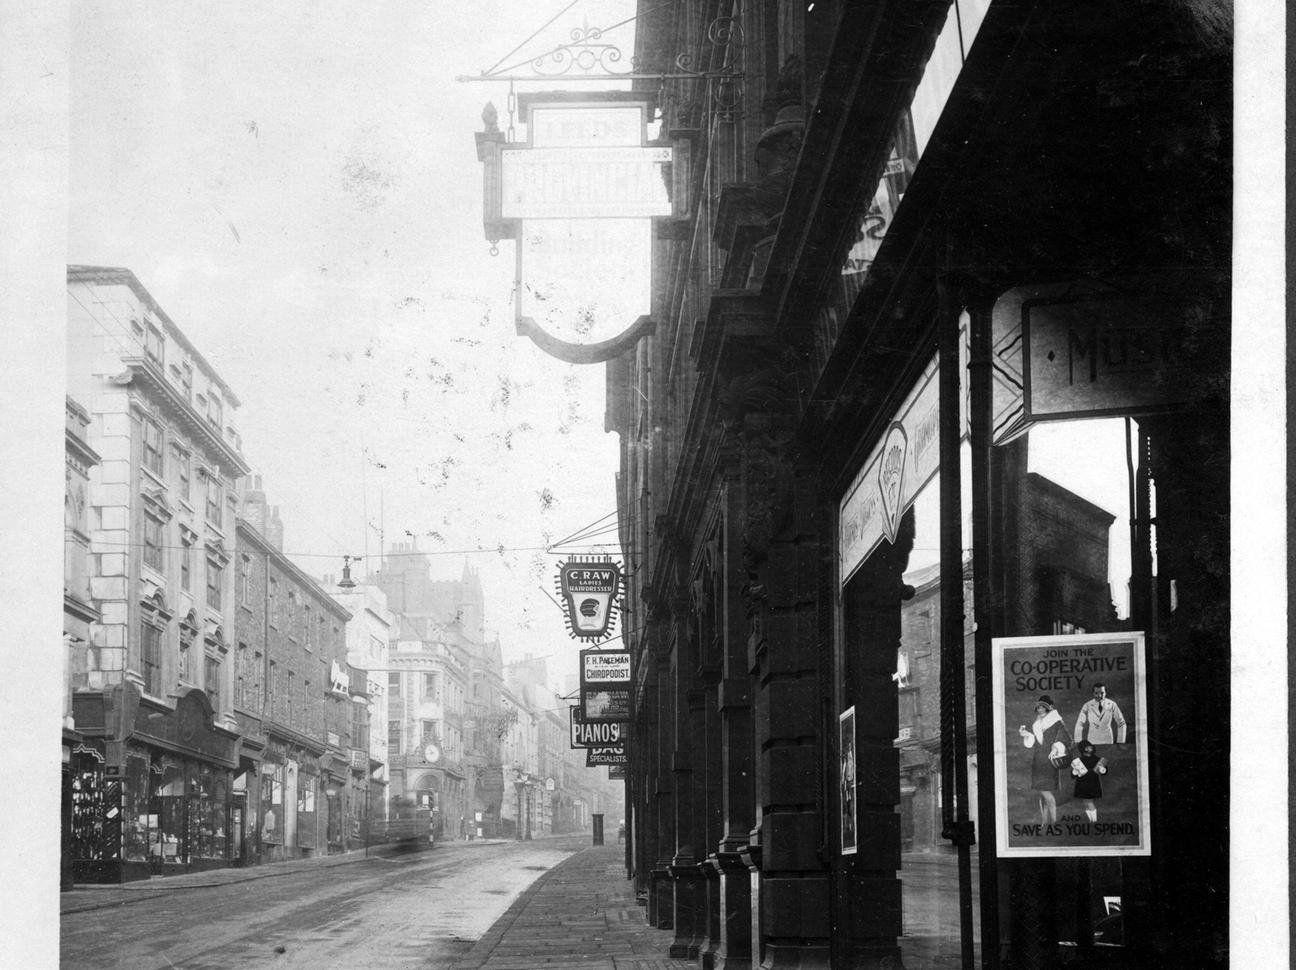 Albion Street. On the right is part of Leeds Industrial Co-operative Society. The company had two blocks of property, one on each side of the road. Posters in the window advise 'Join the Co-operative Society - Save as you spend'.